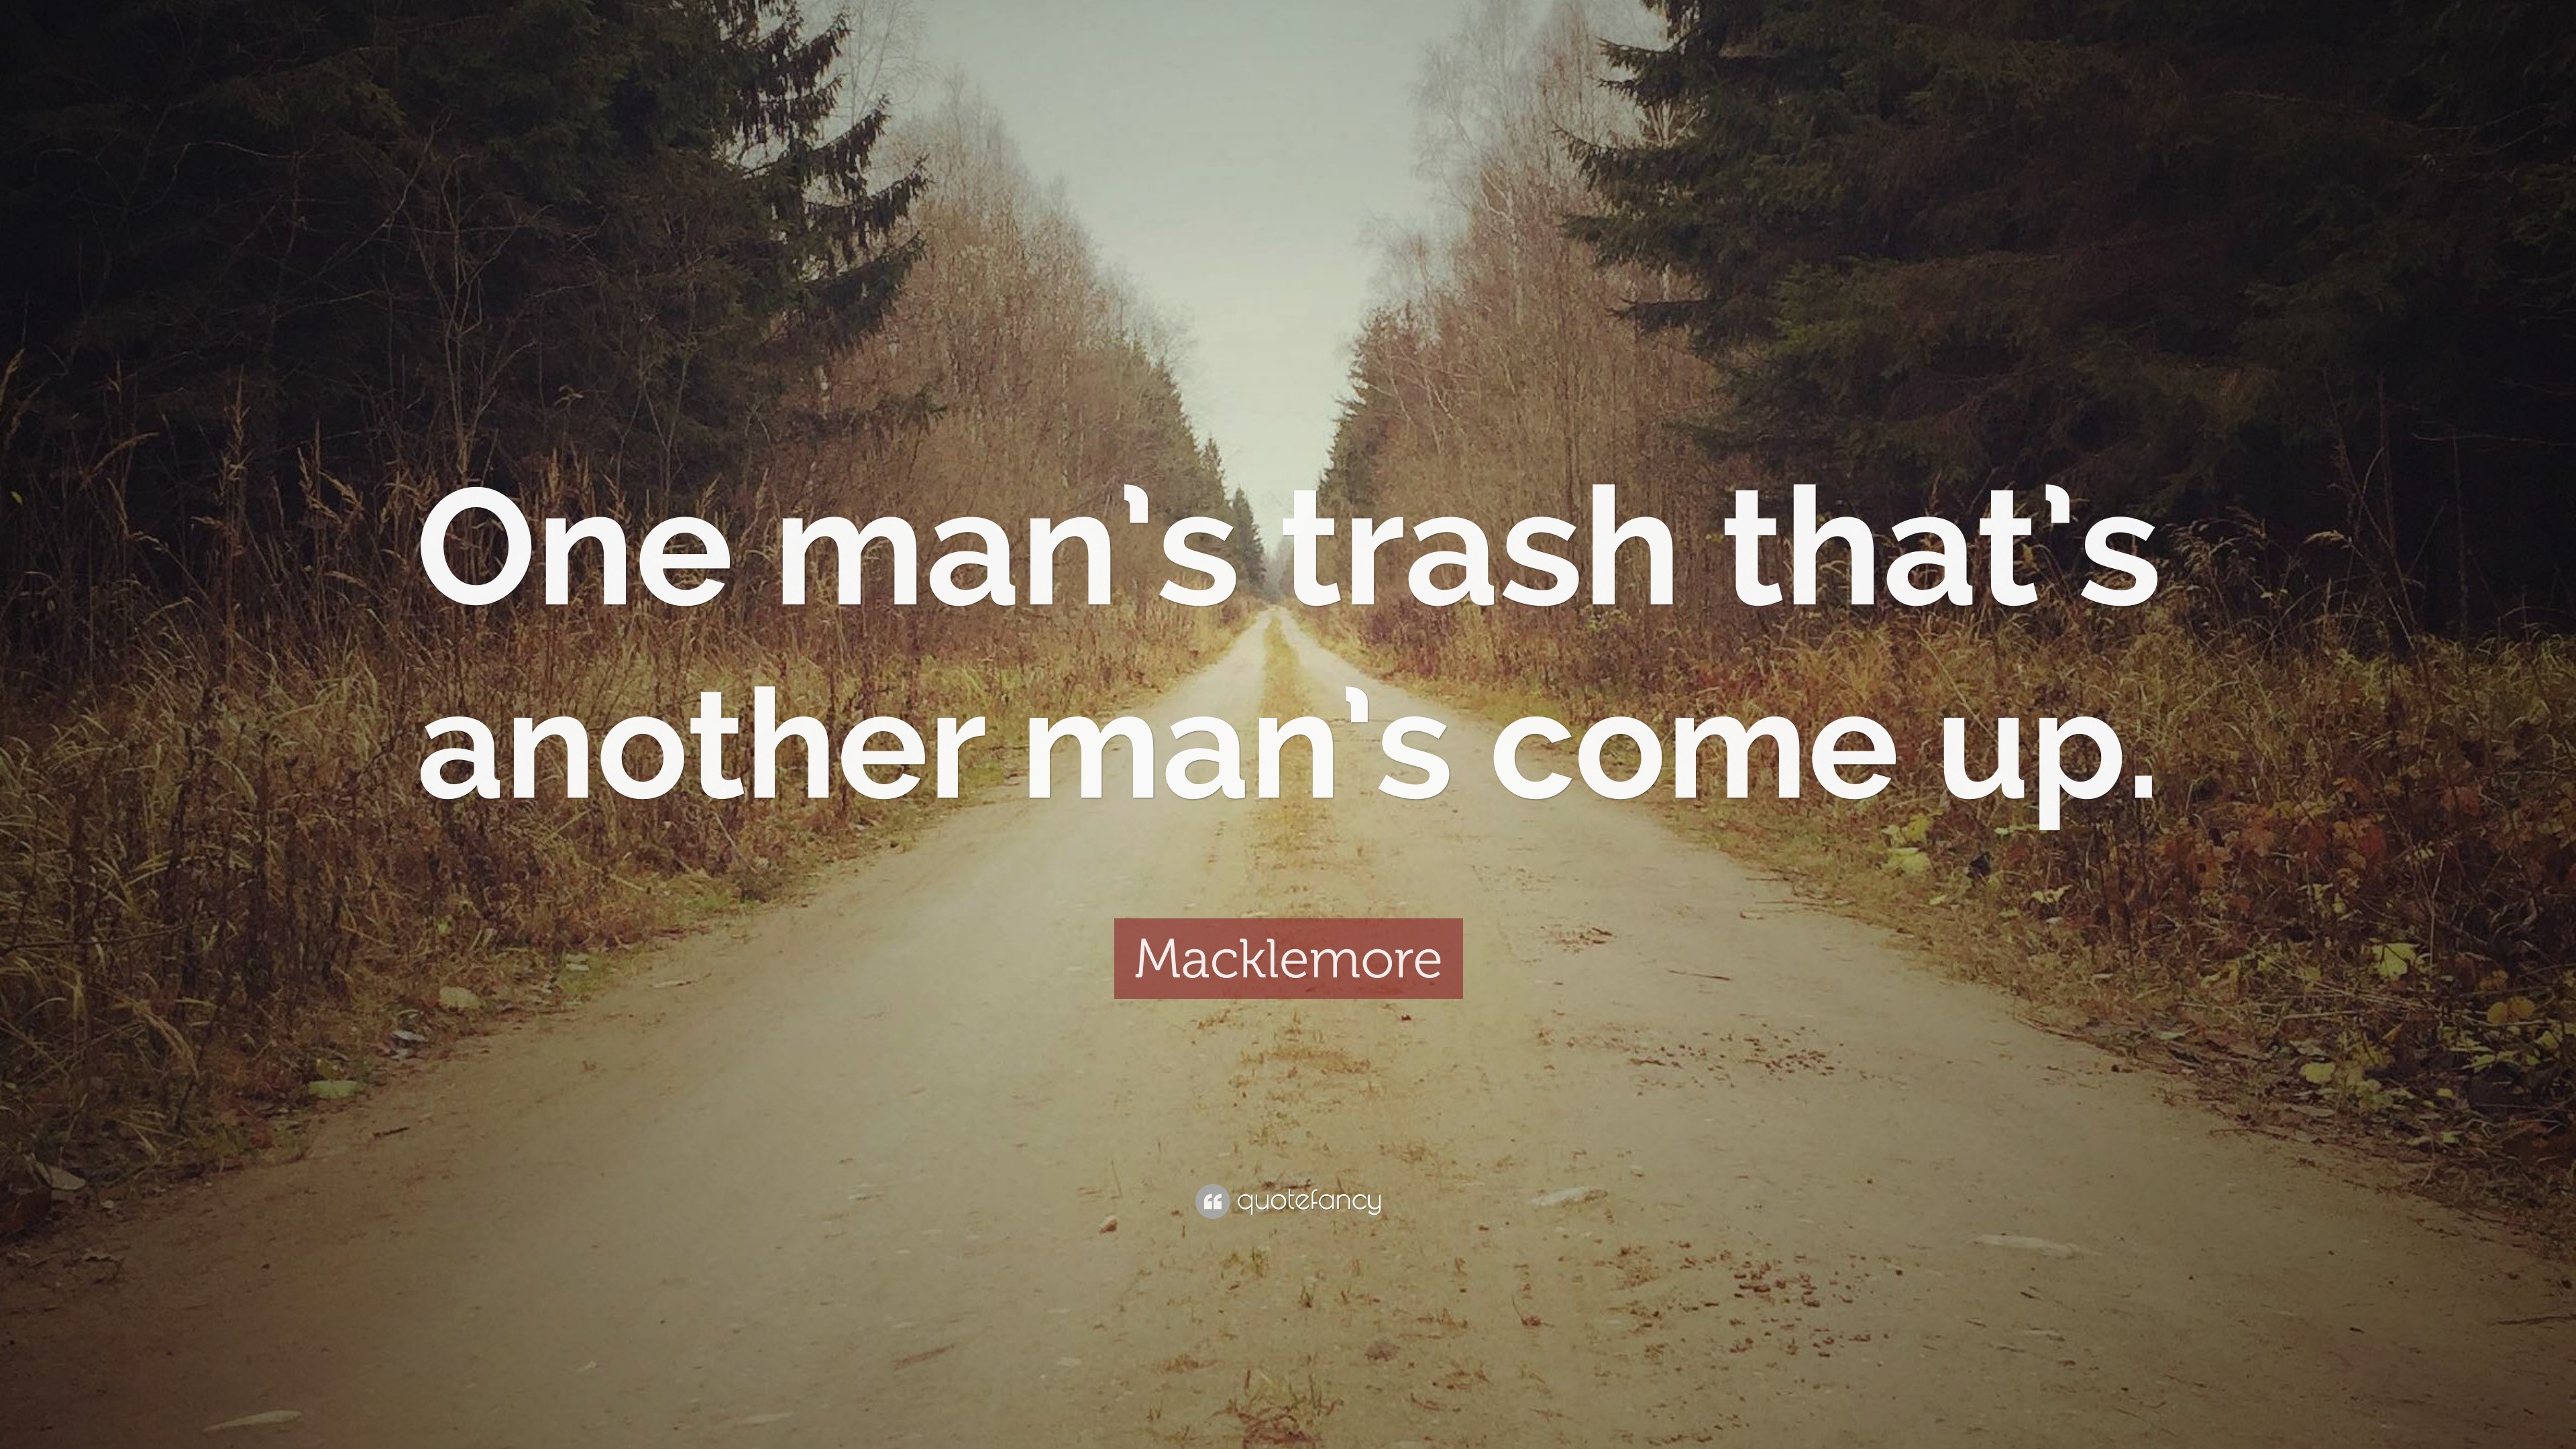 1008008-Macklemore-Quote-One-man-s-trash-that-s-another-man-s-come-up.jpg